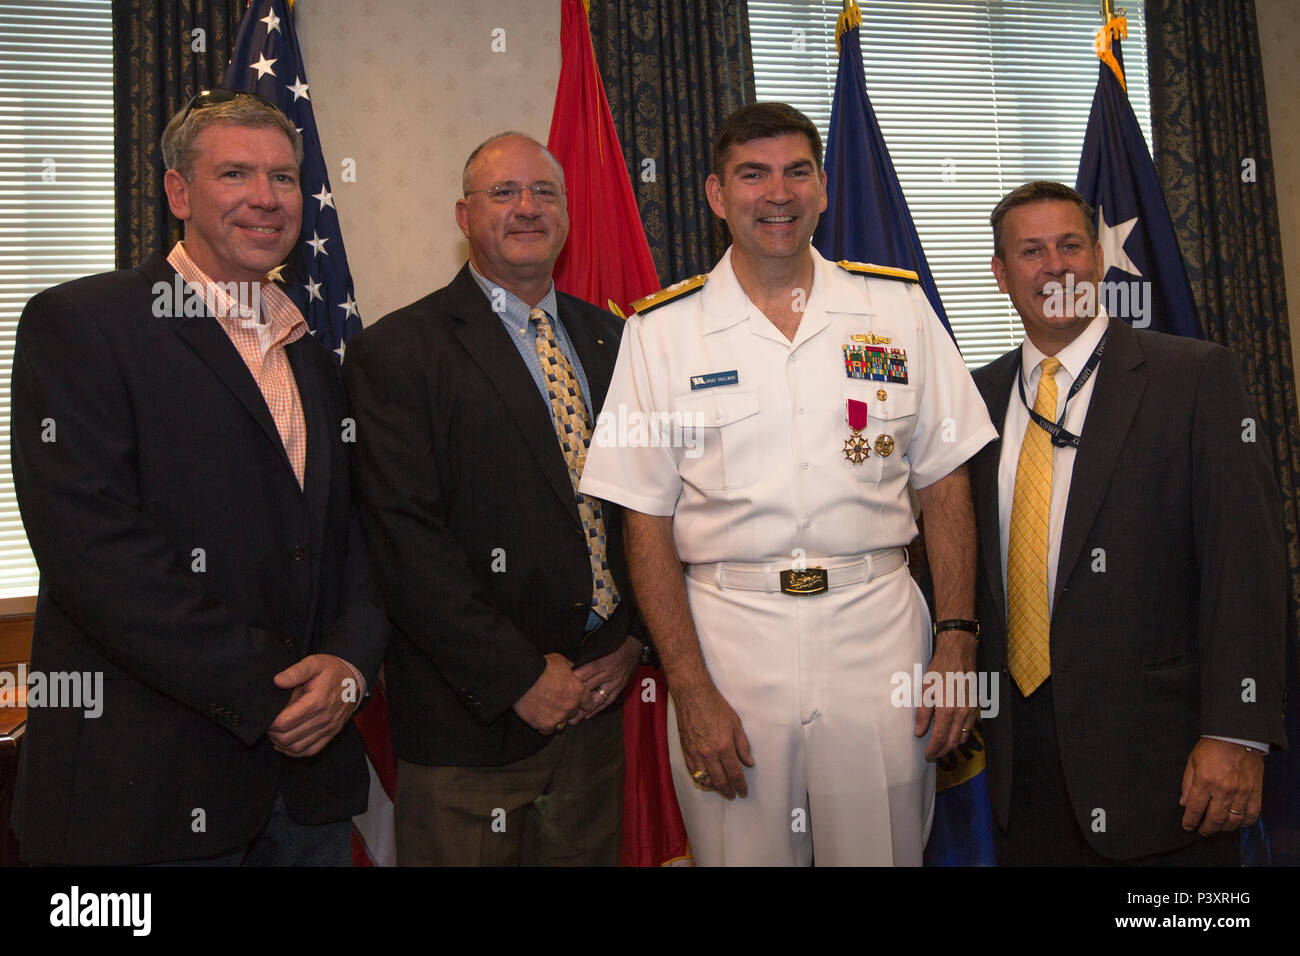 From left, Robert James, Richard Stryker, U.S. Navy Rear Adm. Brad Skillman, executive assisant to the Assistant Secretary of the Navy, Financial Management and Comptroller, and Thomas Conlon pose for a photo after a promotion ceremony at the Pentagon, Washington, D.C., July 22, 2016. Skillman was promoted from the rank of captain to rear admiral. (U.S. Marine Corps photo by Lance Cpl. Kayla V. Staten) Stock Photo